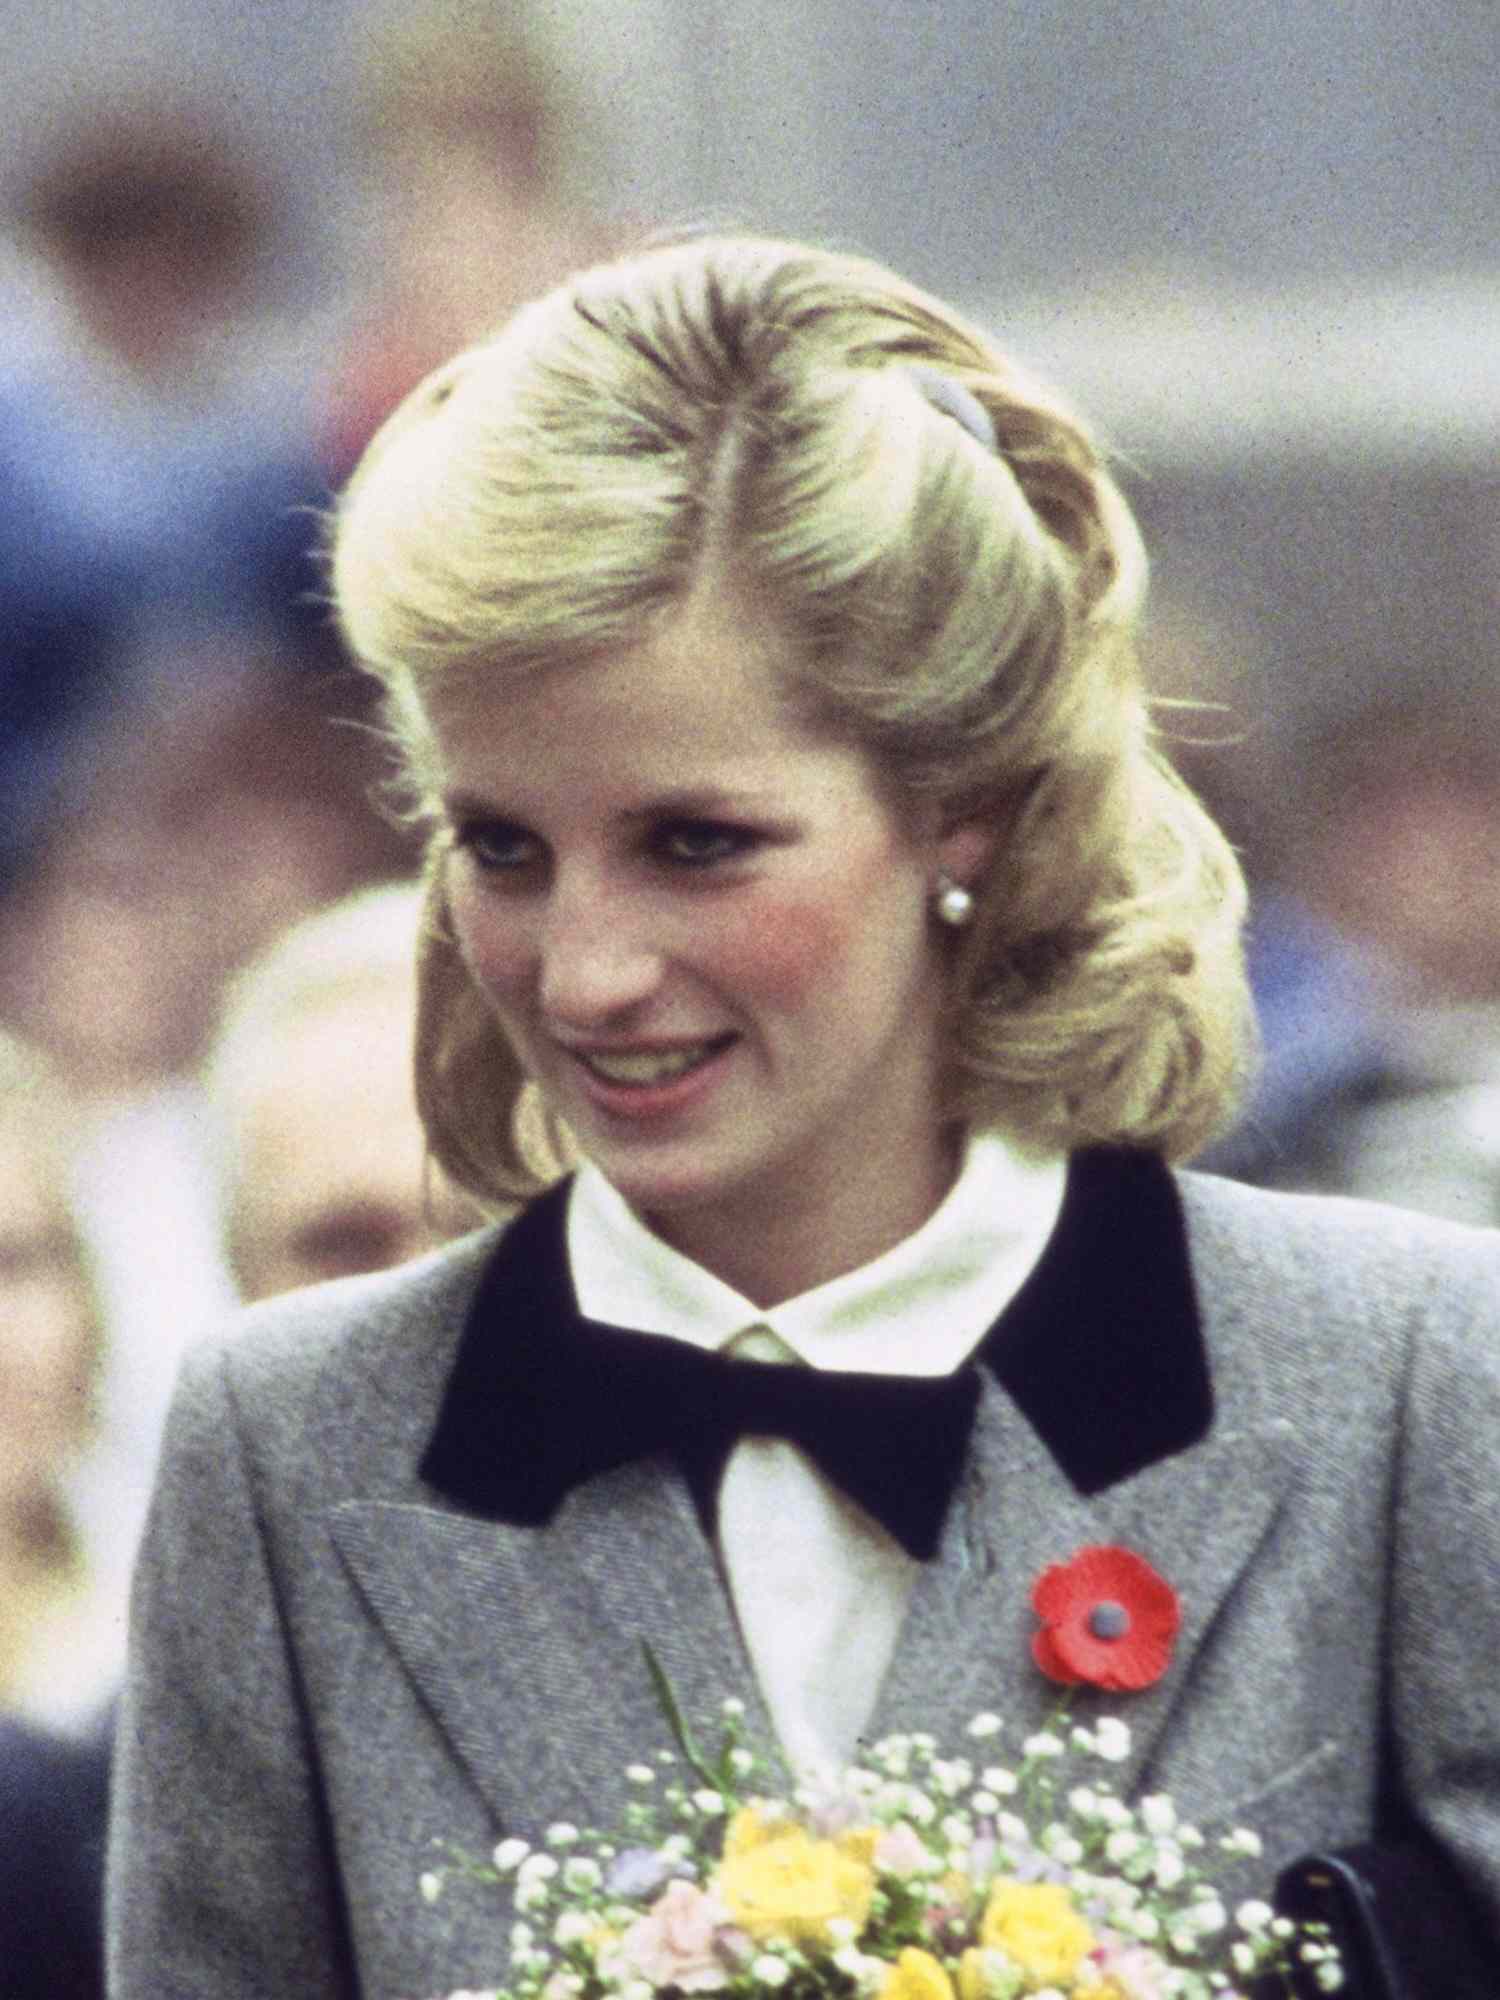 Princess Diana wears her hair pinned back, a gray blazer, and a white blouse with black bow tie